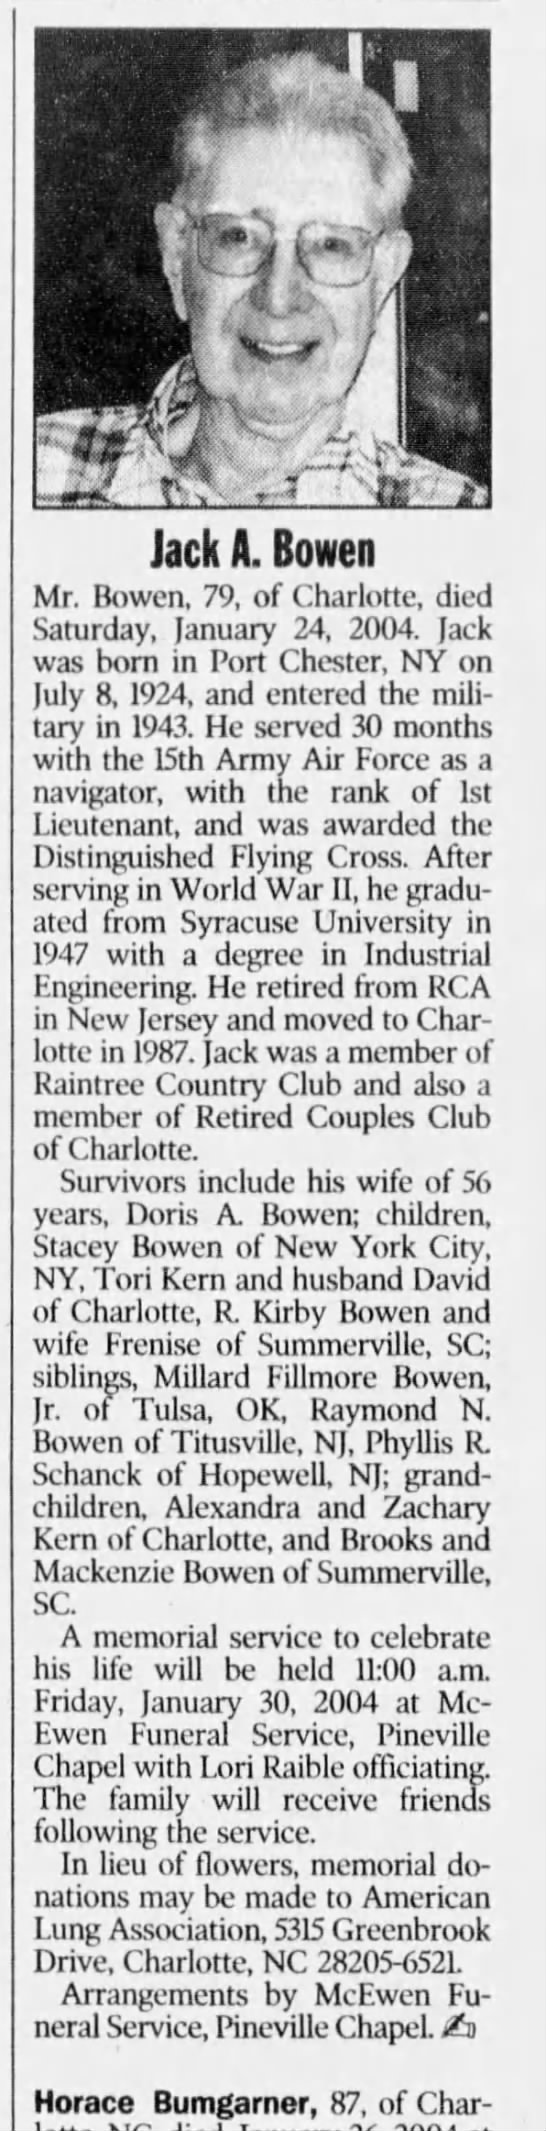 https://www.newspapers.com/clip/90072142/obituary-for-jack-a-bowen-1924-2004/